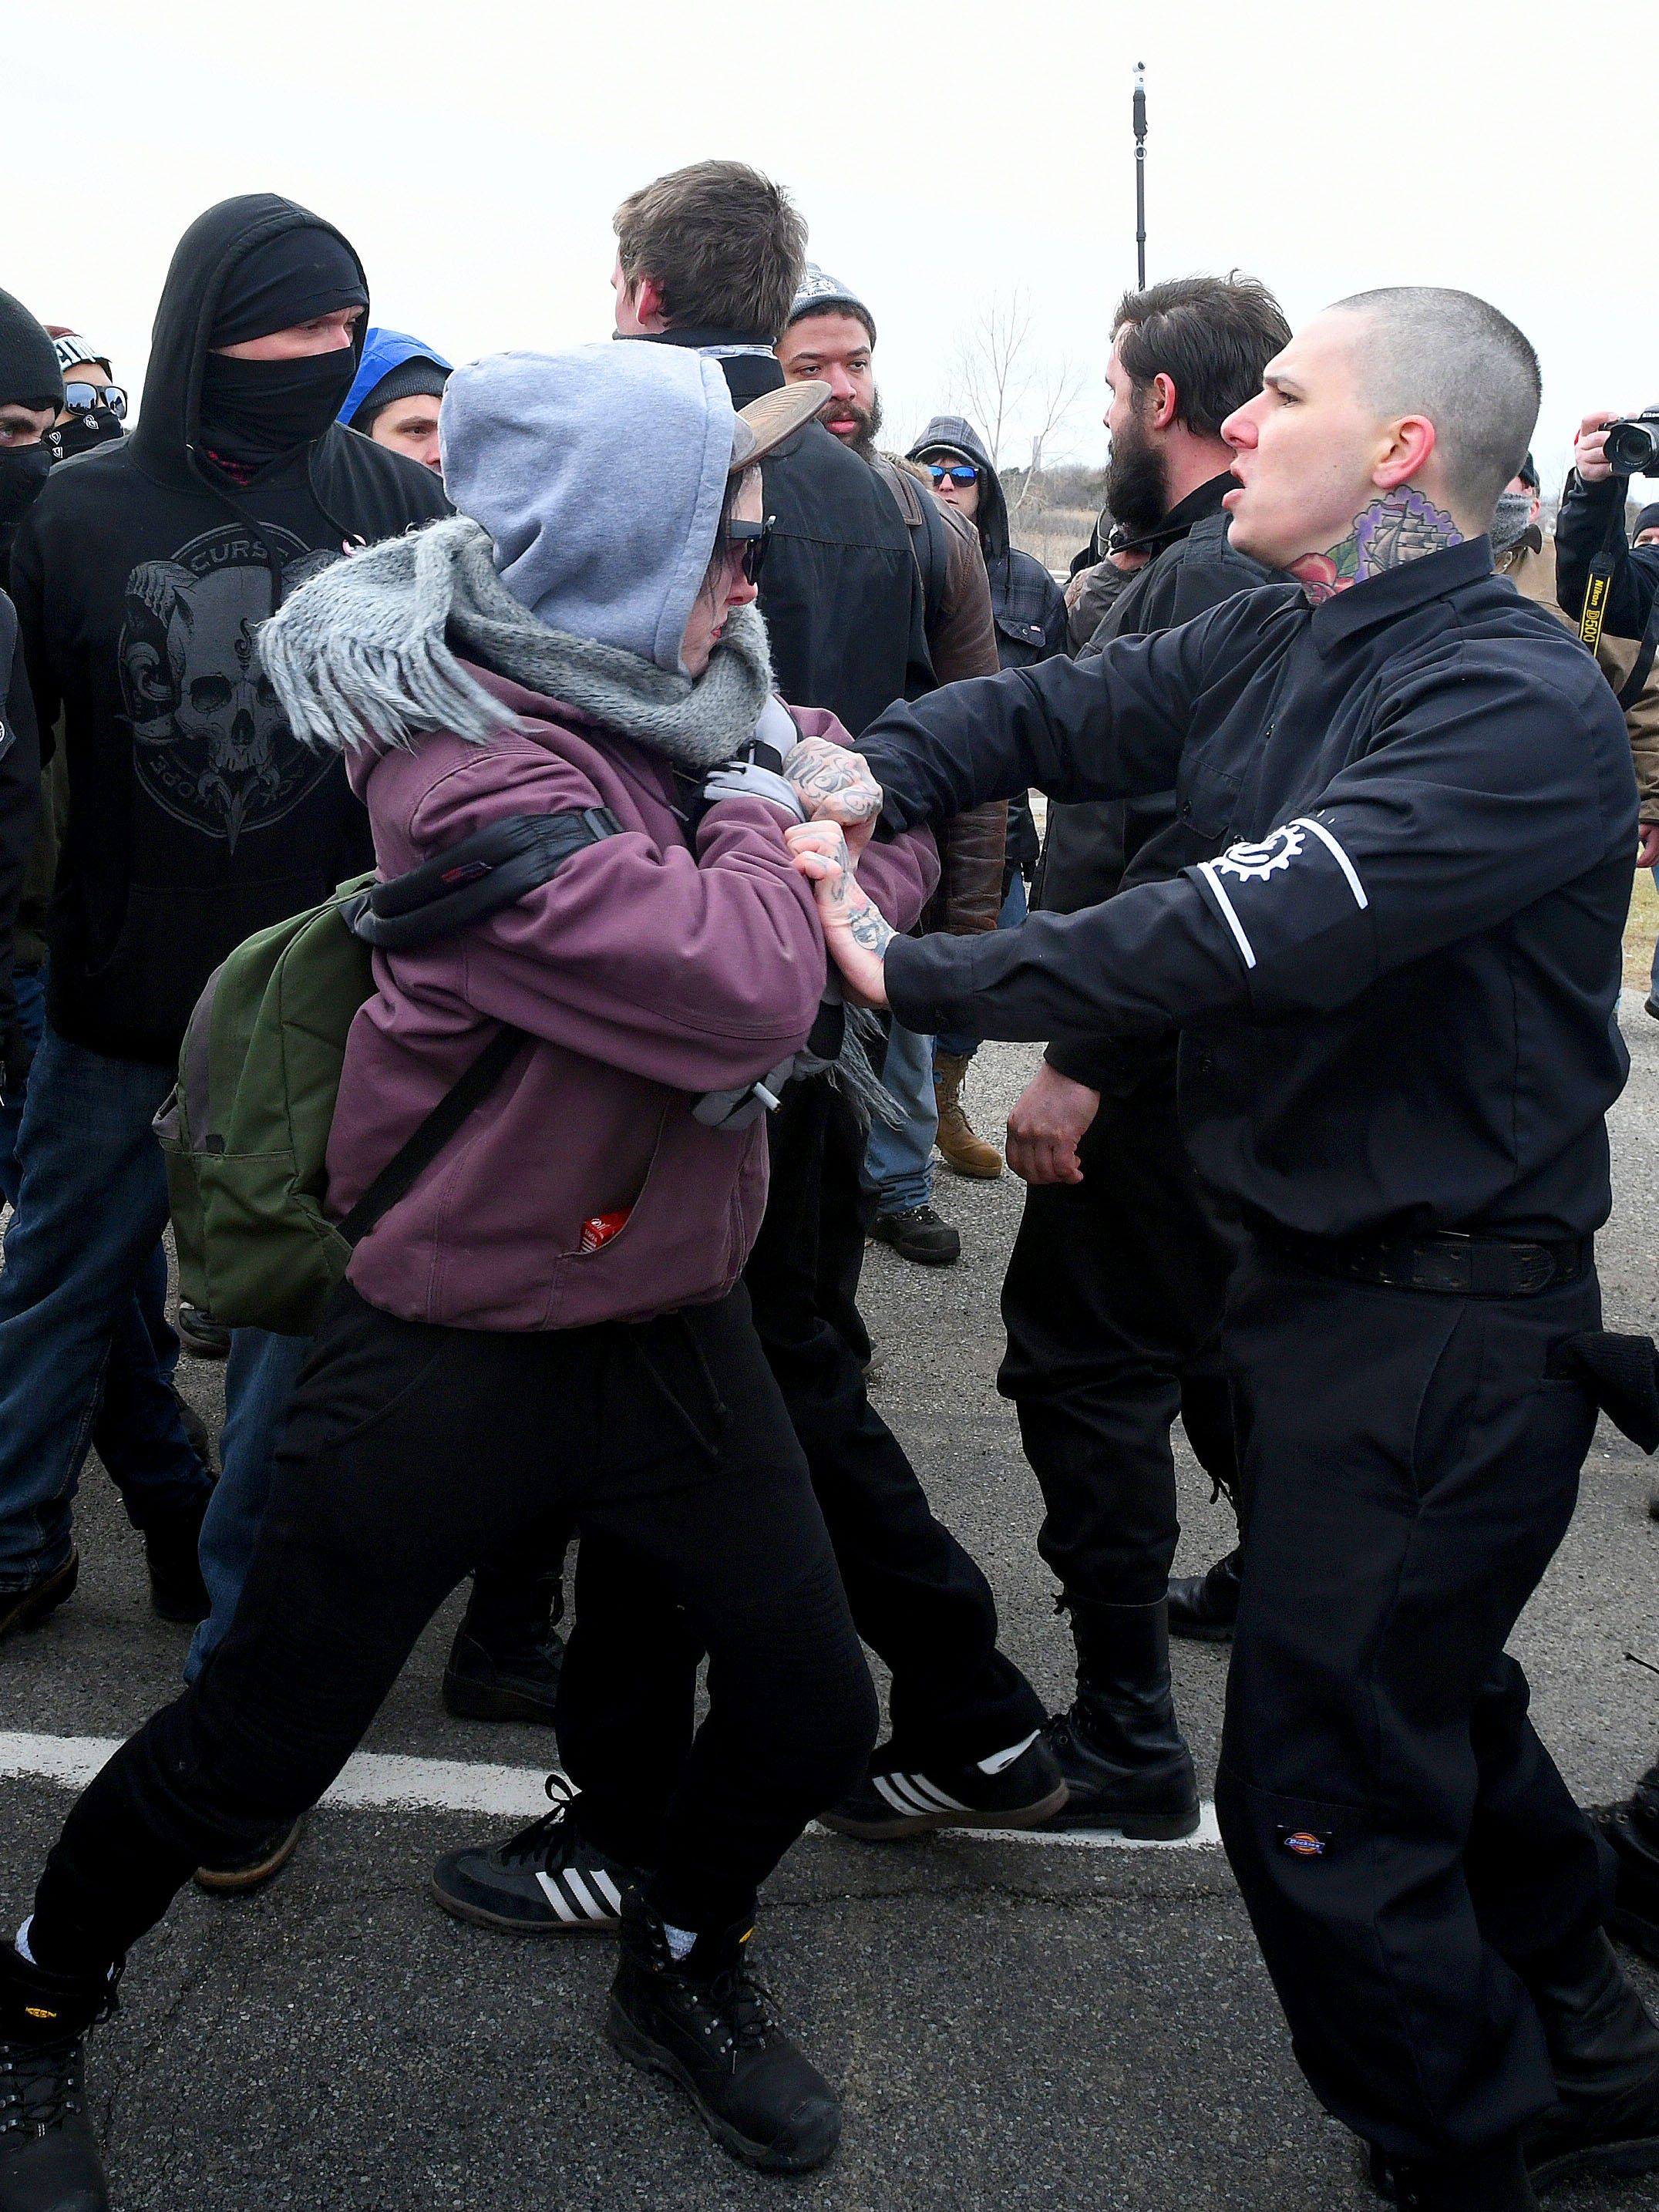 An anti-Richard Spencer protestor, left, clashes with a white nationalist. A group of Spencer sympathizers were trying to make their way to the MSU Pavilion and the protestors were trying to stop them on Michigan State University's campus in East Lansing on Monday, March 5, 2018.